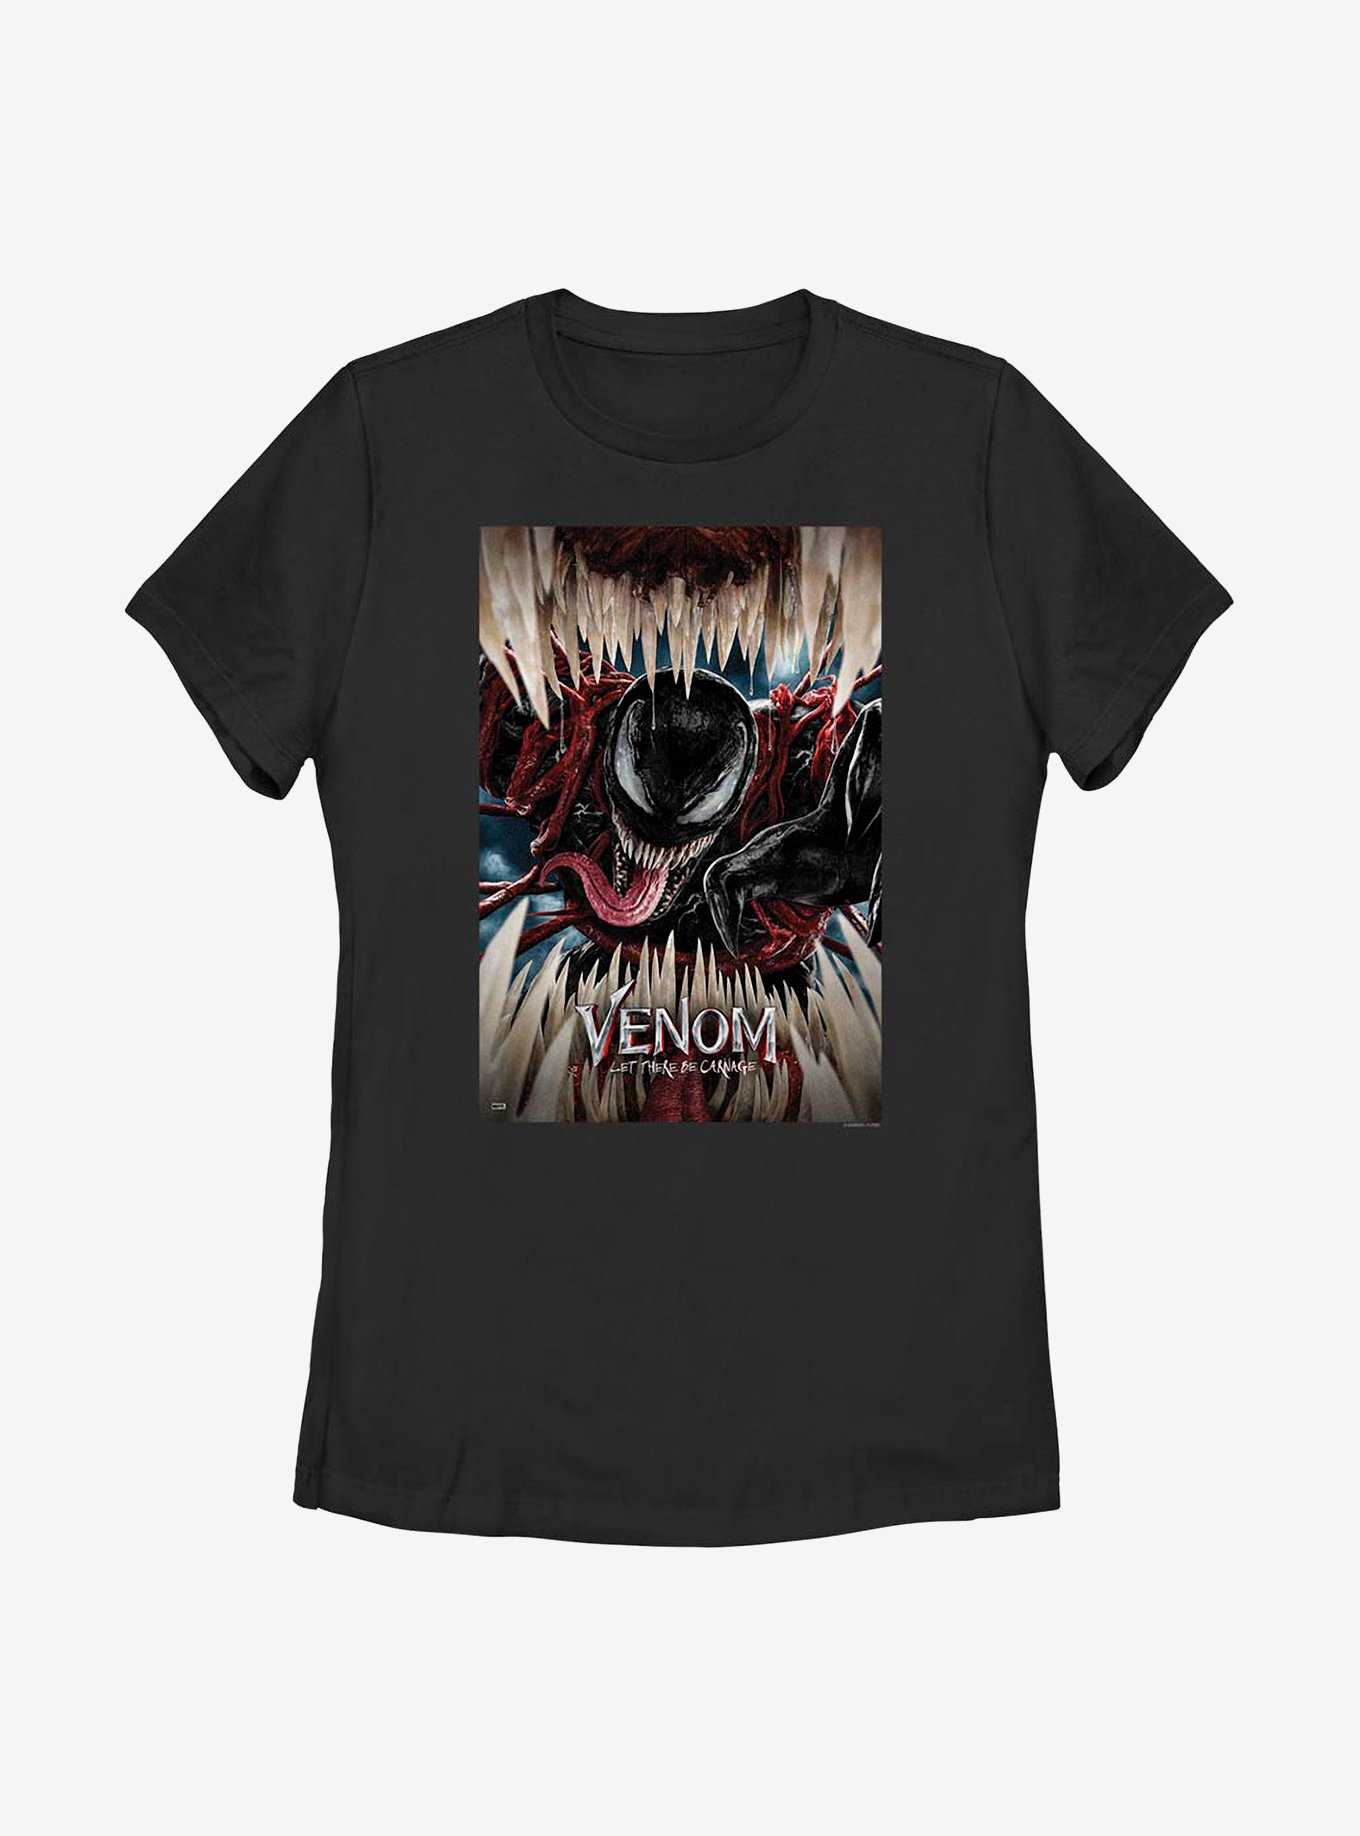 Marvel Venom: Let There Be Carnage Poster Womens T-Shirt, , hi-res